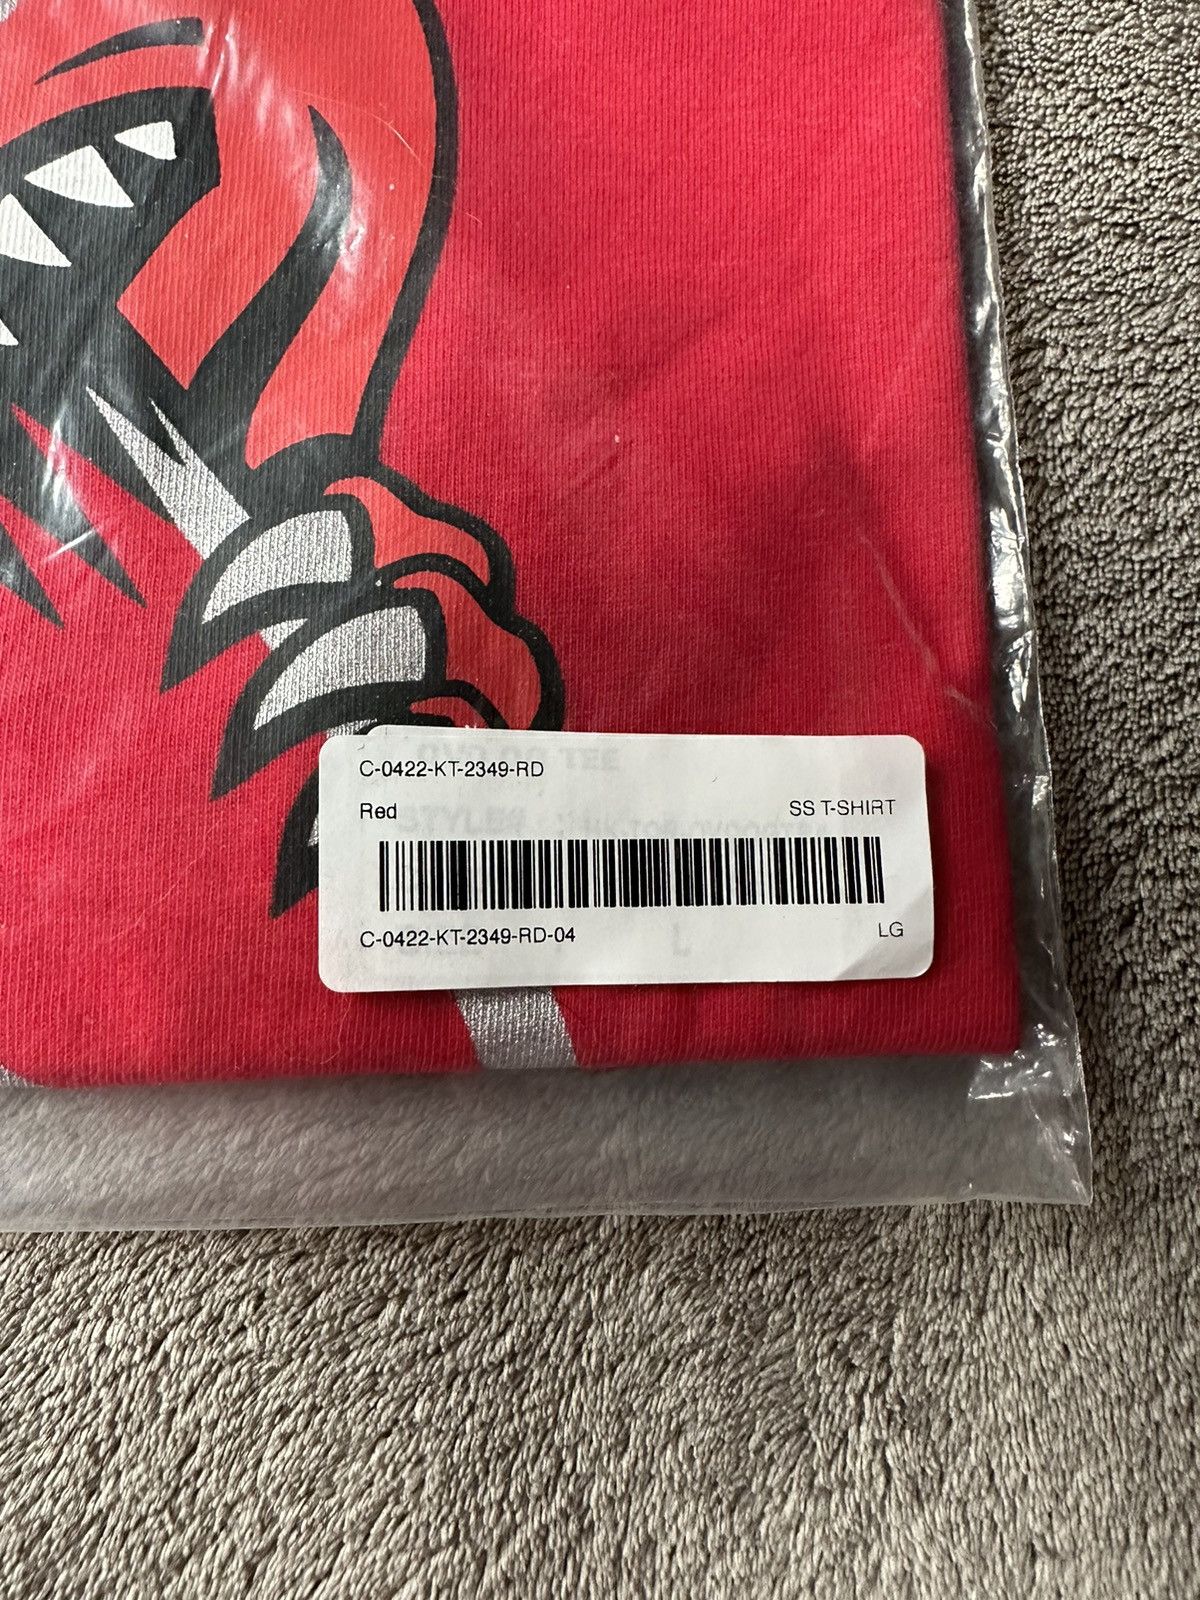 Octobers Very Own OVO Toronto Raptors x Mitchell & Ness T-SHIRT with tags Size US L / EU 52-54 / 3 - 4 Thumbnail